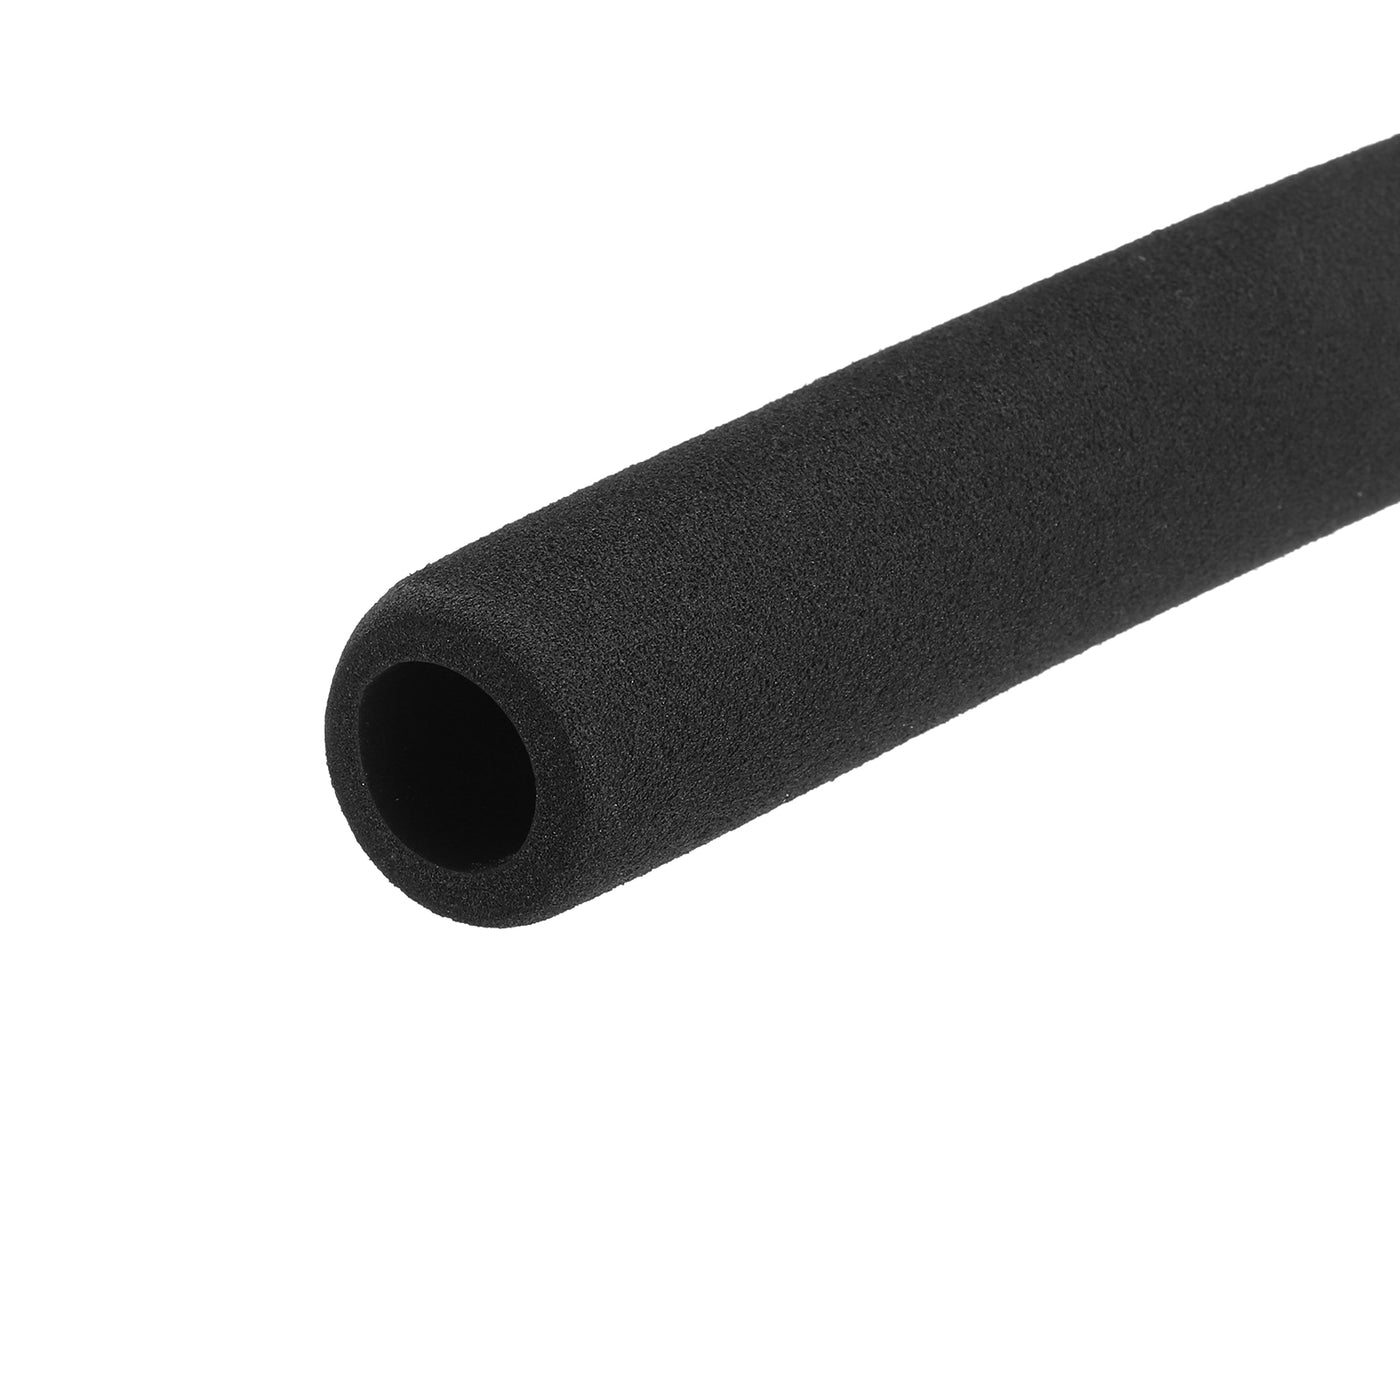 uxcell Uxcell Pipe Insulation Tube Foam Tubing for Handle Grip Support 18mm ID 30mm OD 485mm Heat Preservation Black